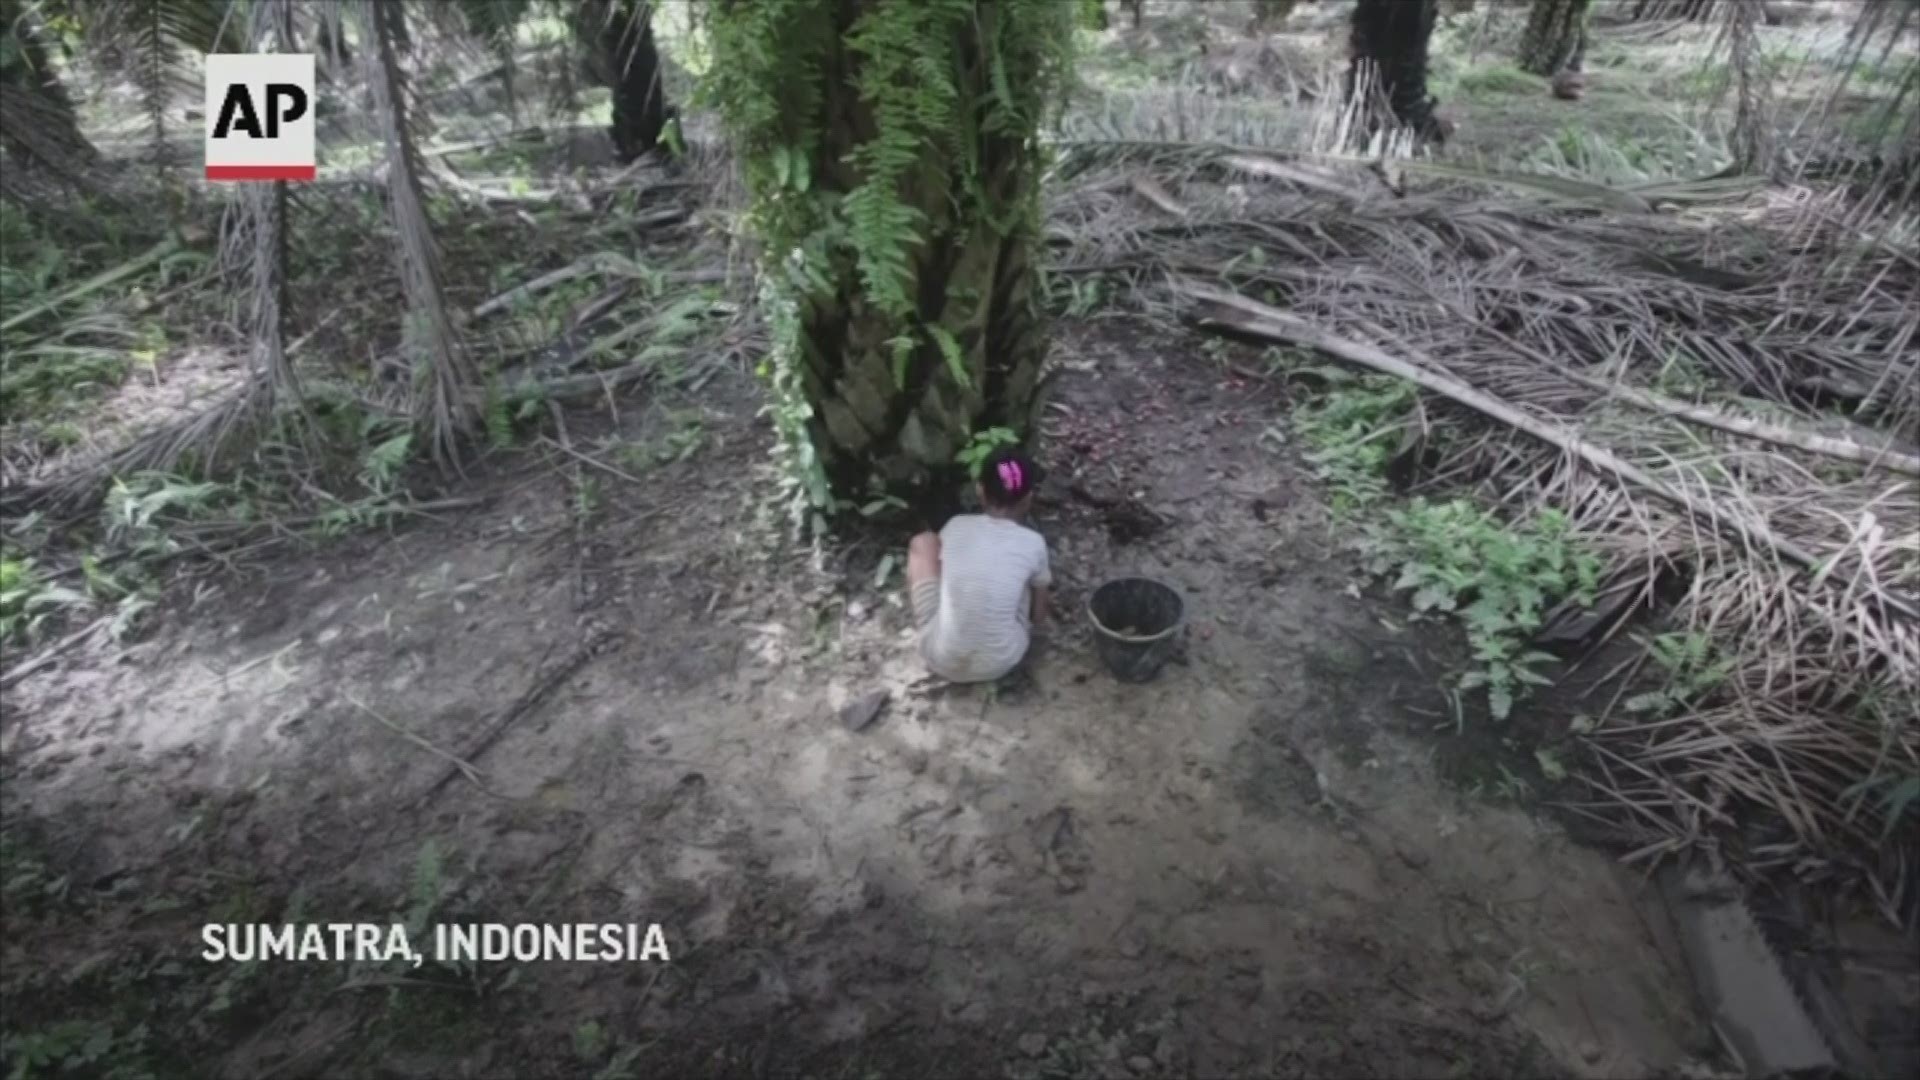 An AP investigation found child labor Indonesia and Malaysia is tied to palm oil industry.